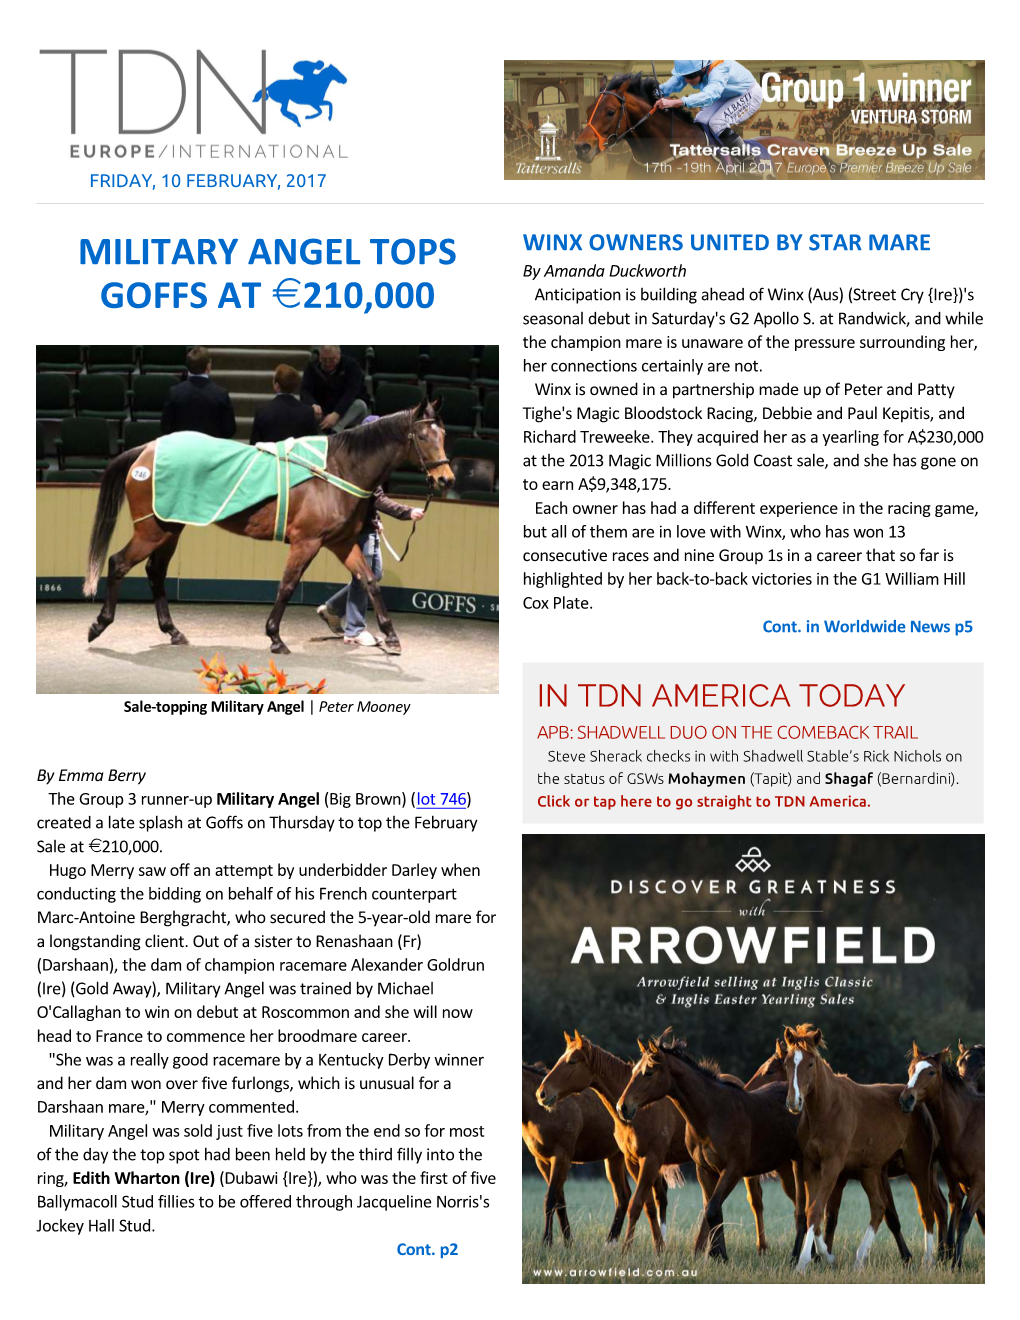 Military Angel Tops Goffs at I210,000 Cont